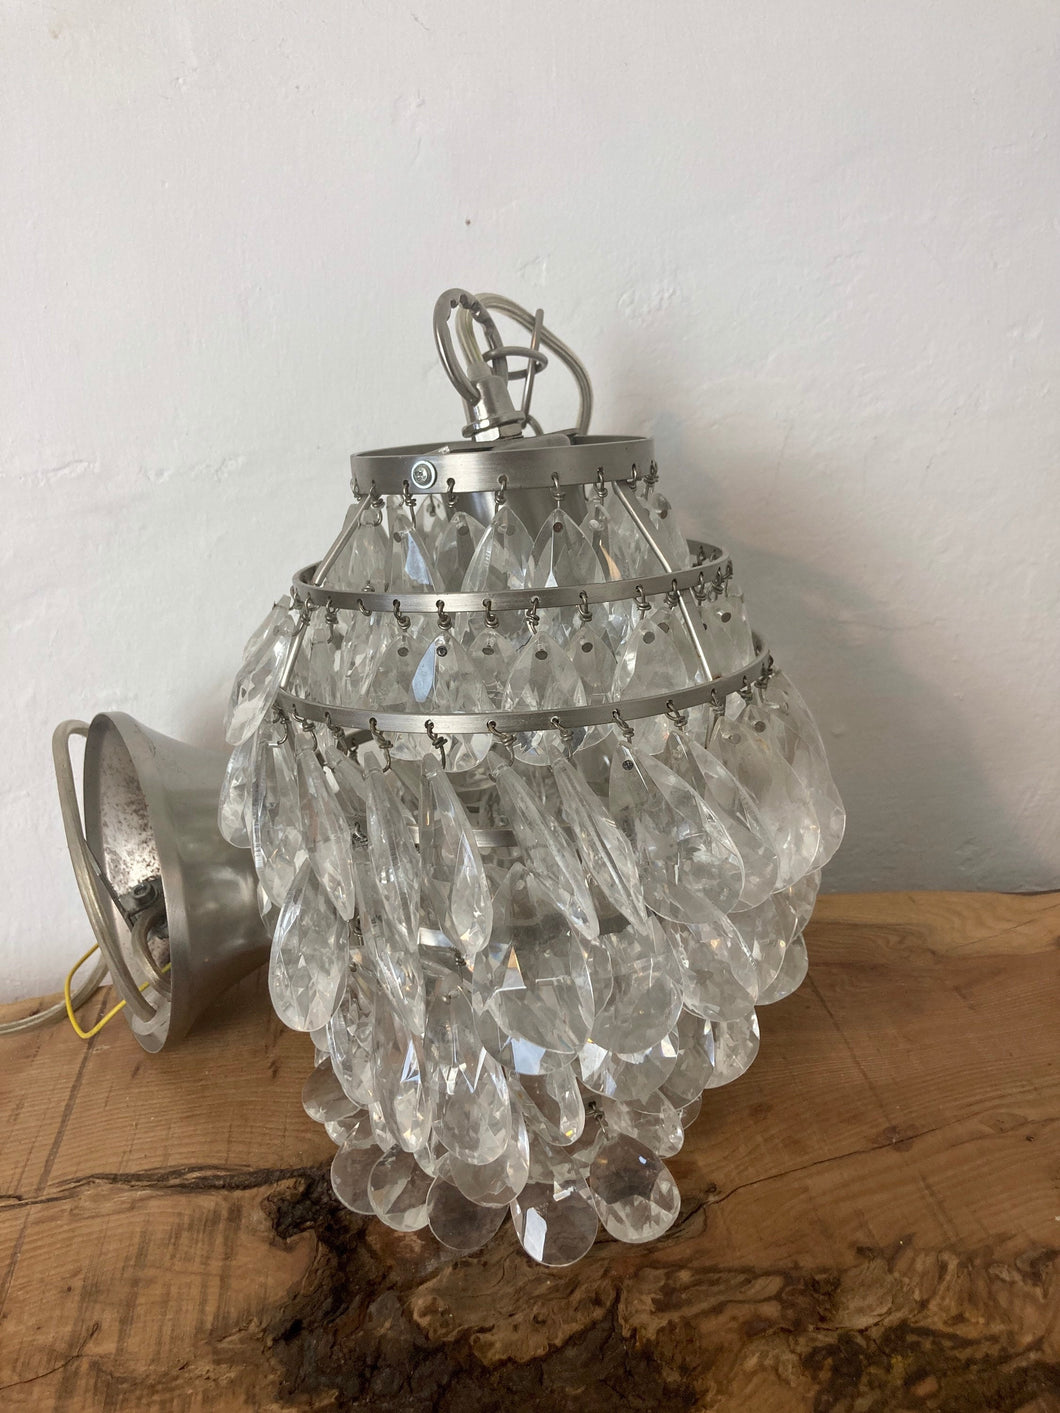 Vintage Laura Ashley crystal pendant, chandelier, ceiling light, collectibles piece